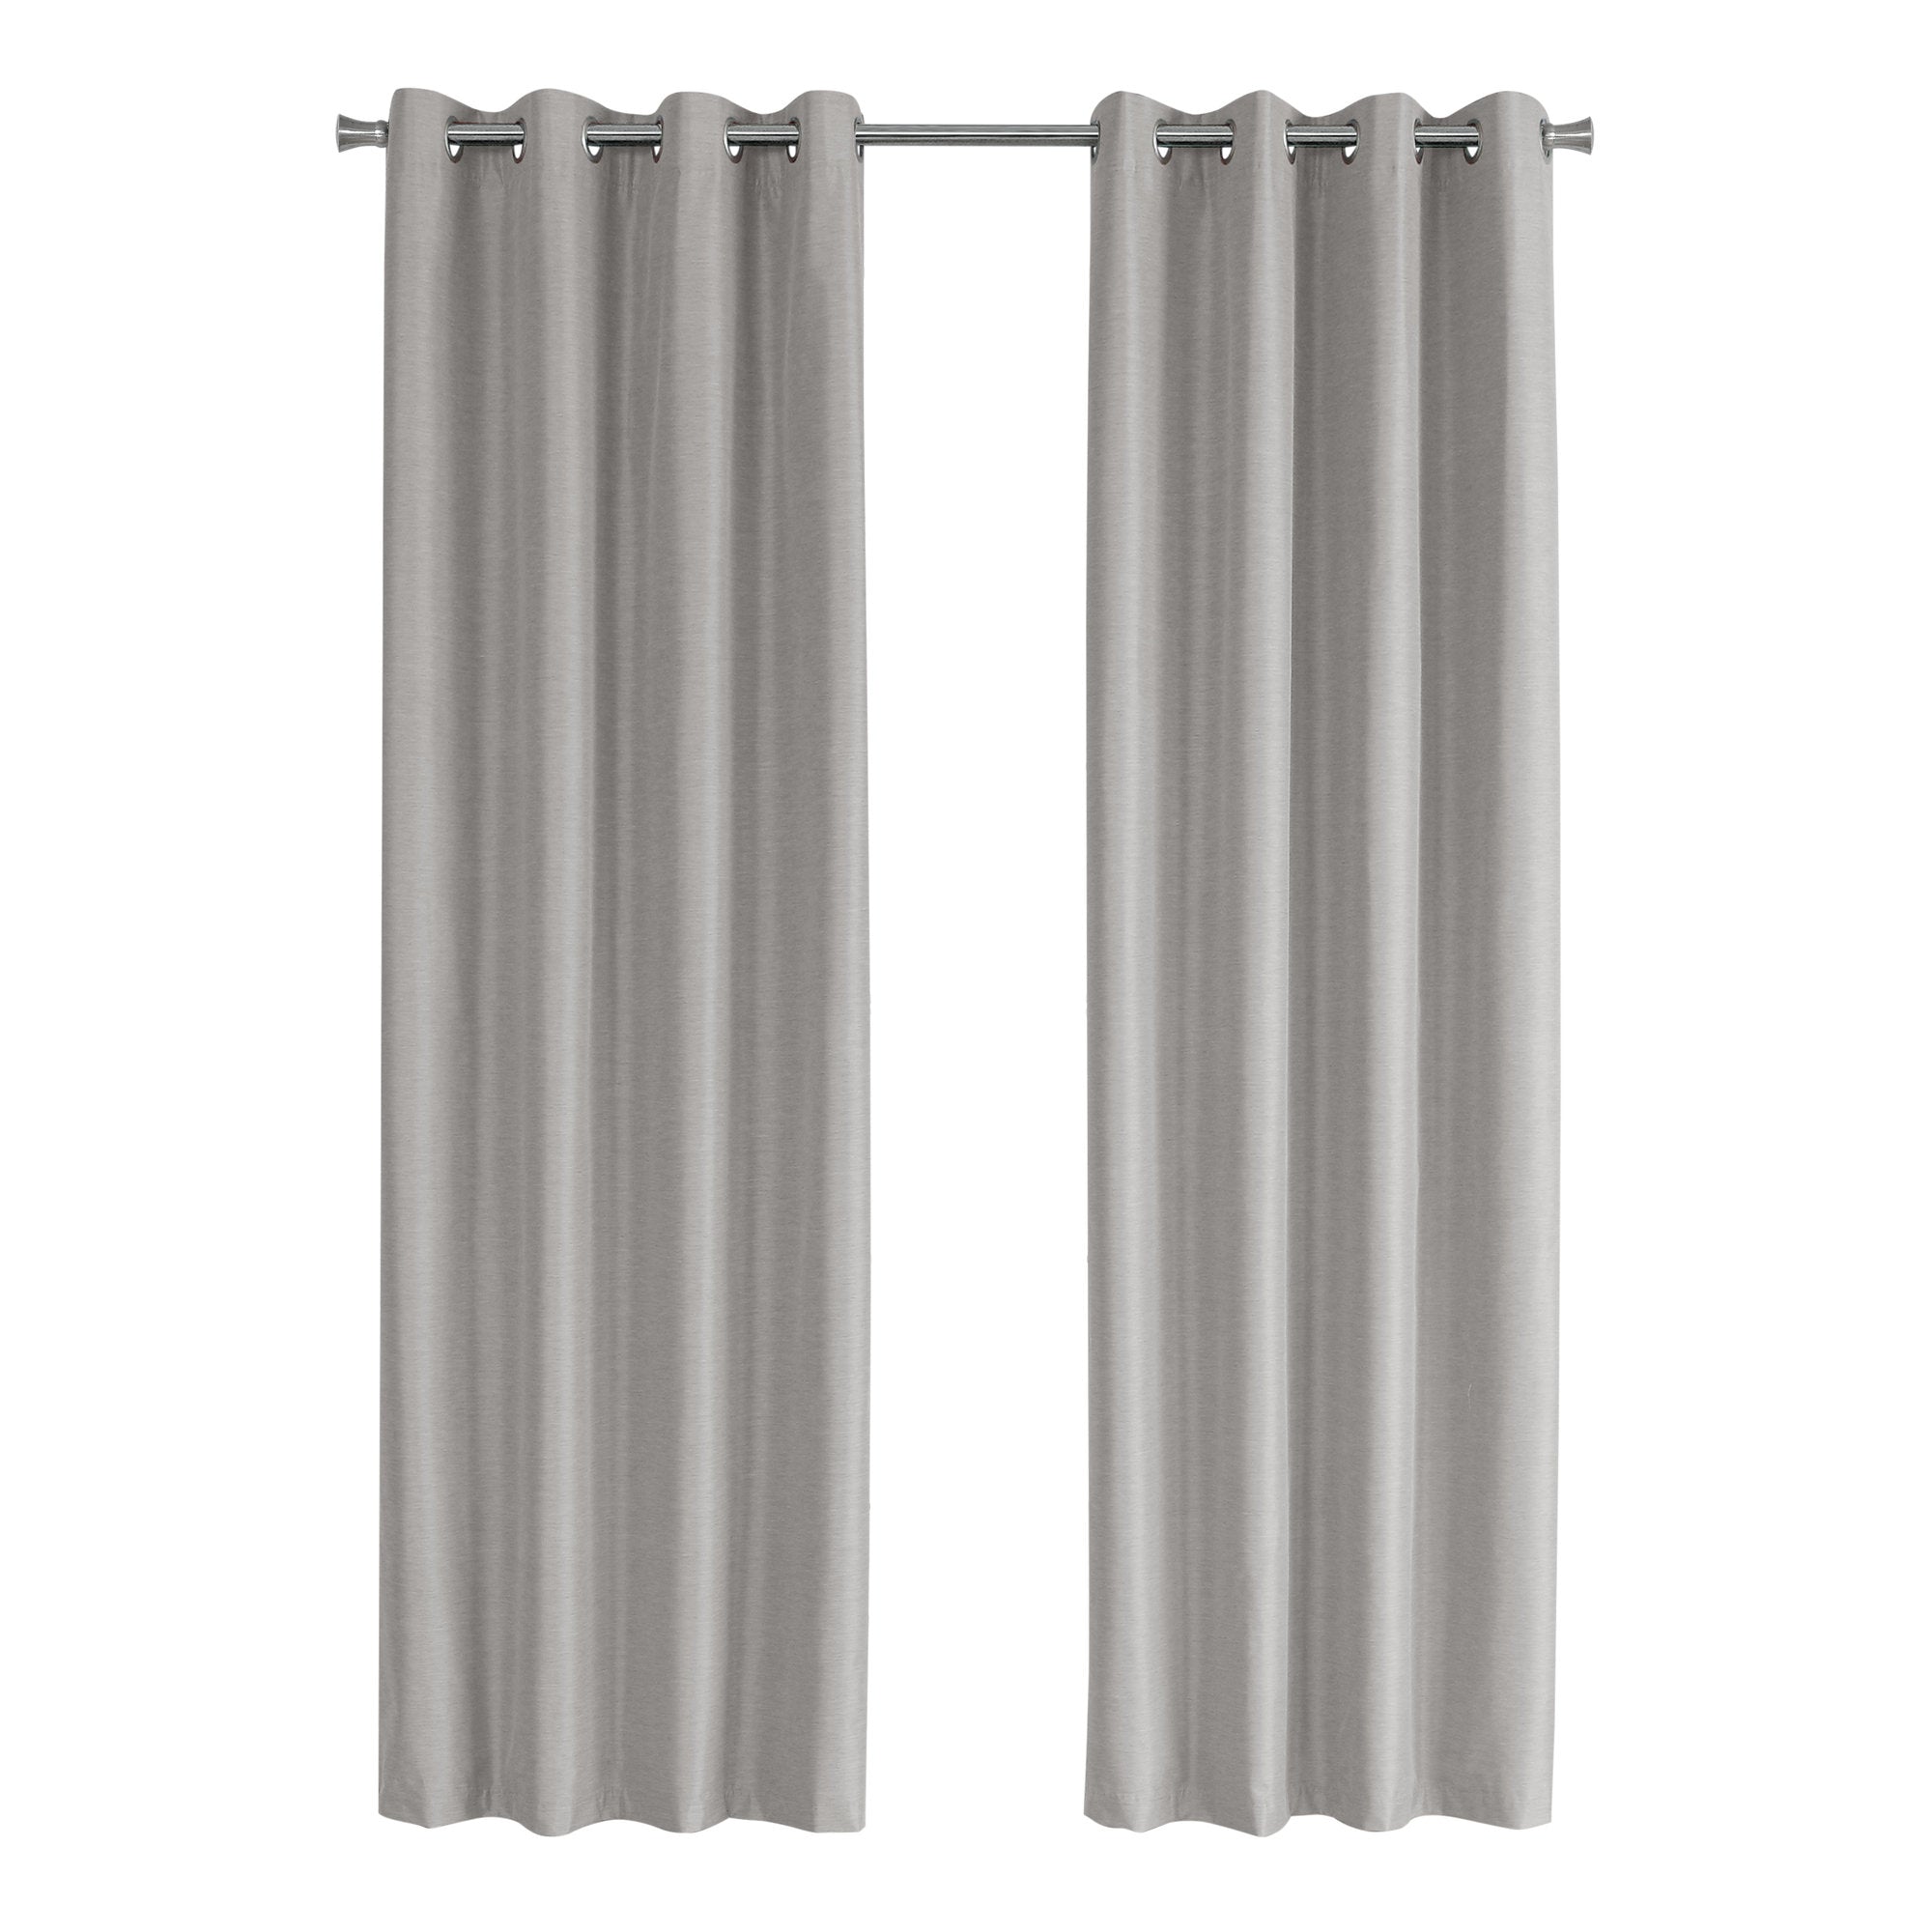 MN-979835    Curtain Panel, 2Pcs Set, 54"W X 84"L, 100% Blackout, Grommet, Living Room, Bedroom, Kitchen, Thermal Insulation Fabric, Polyester Full Light Blocking Fabric, Silver, Contemporary, Modern